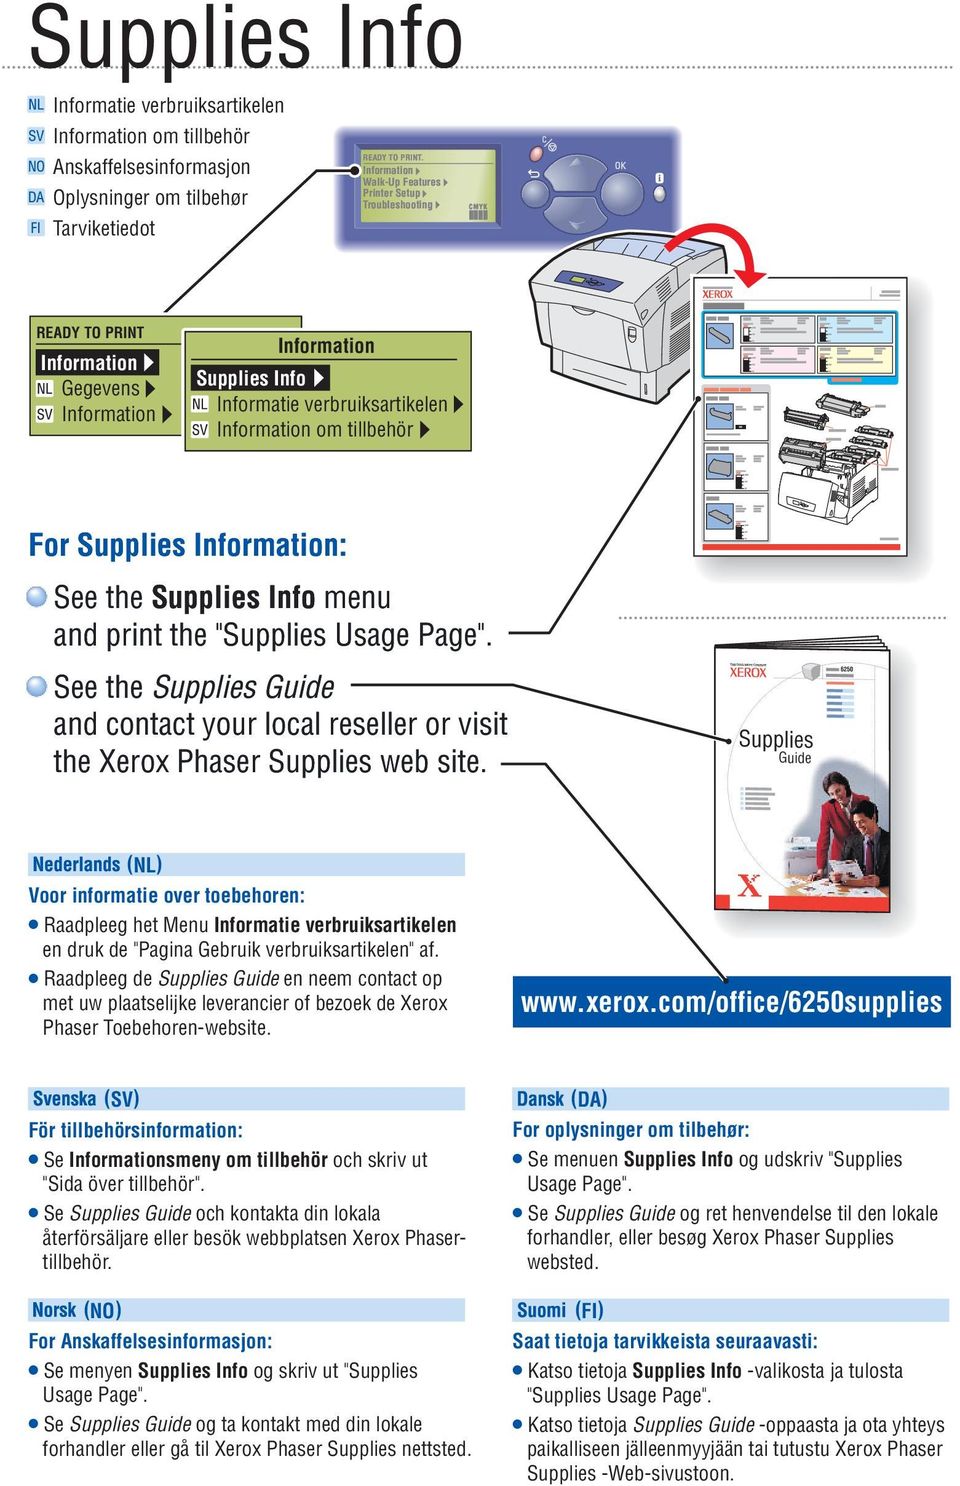 See the Supplies Guide and contact your local reseller or visit the Xerox Phaser Supplies web site.